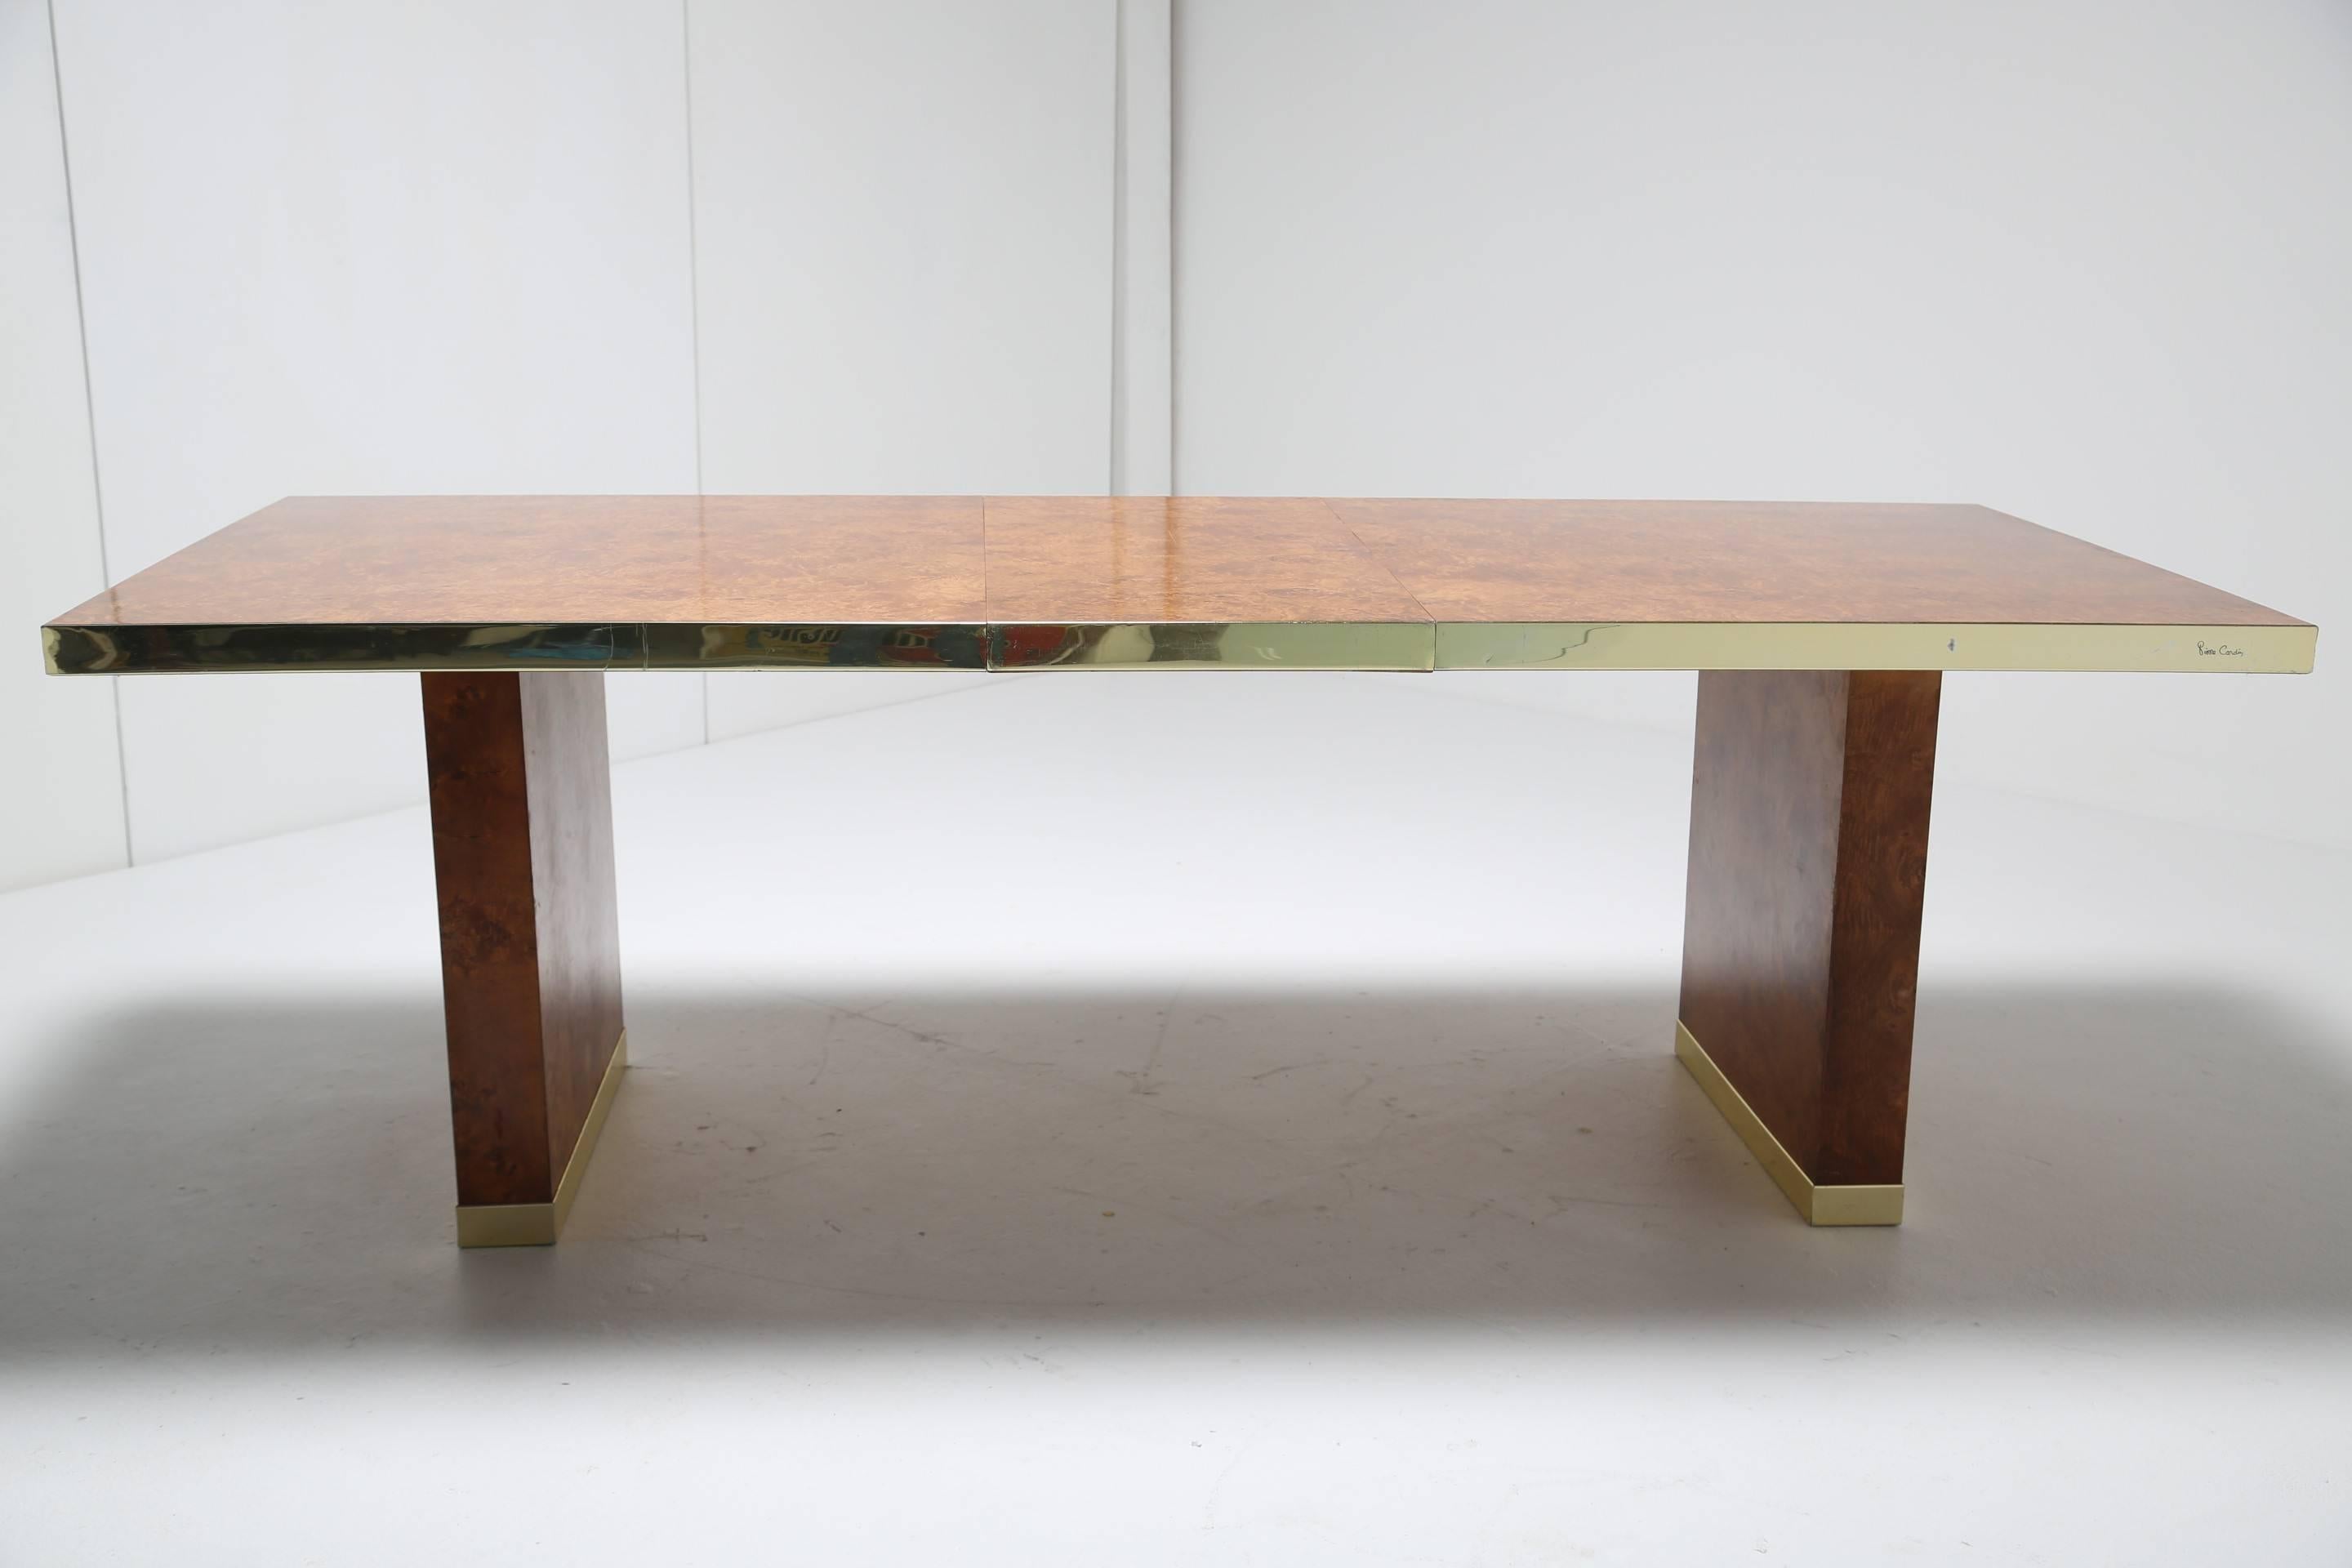 Pierre Cardin signed burlwood and brass extending mid century dining table, 1970s In Good Condition For Sale In Oberstown, Lusk, IE